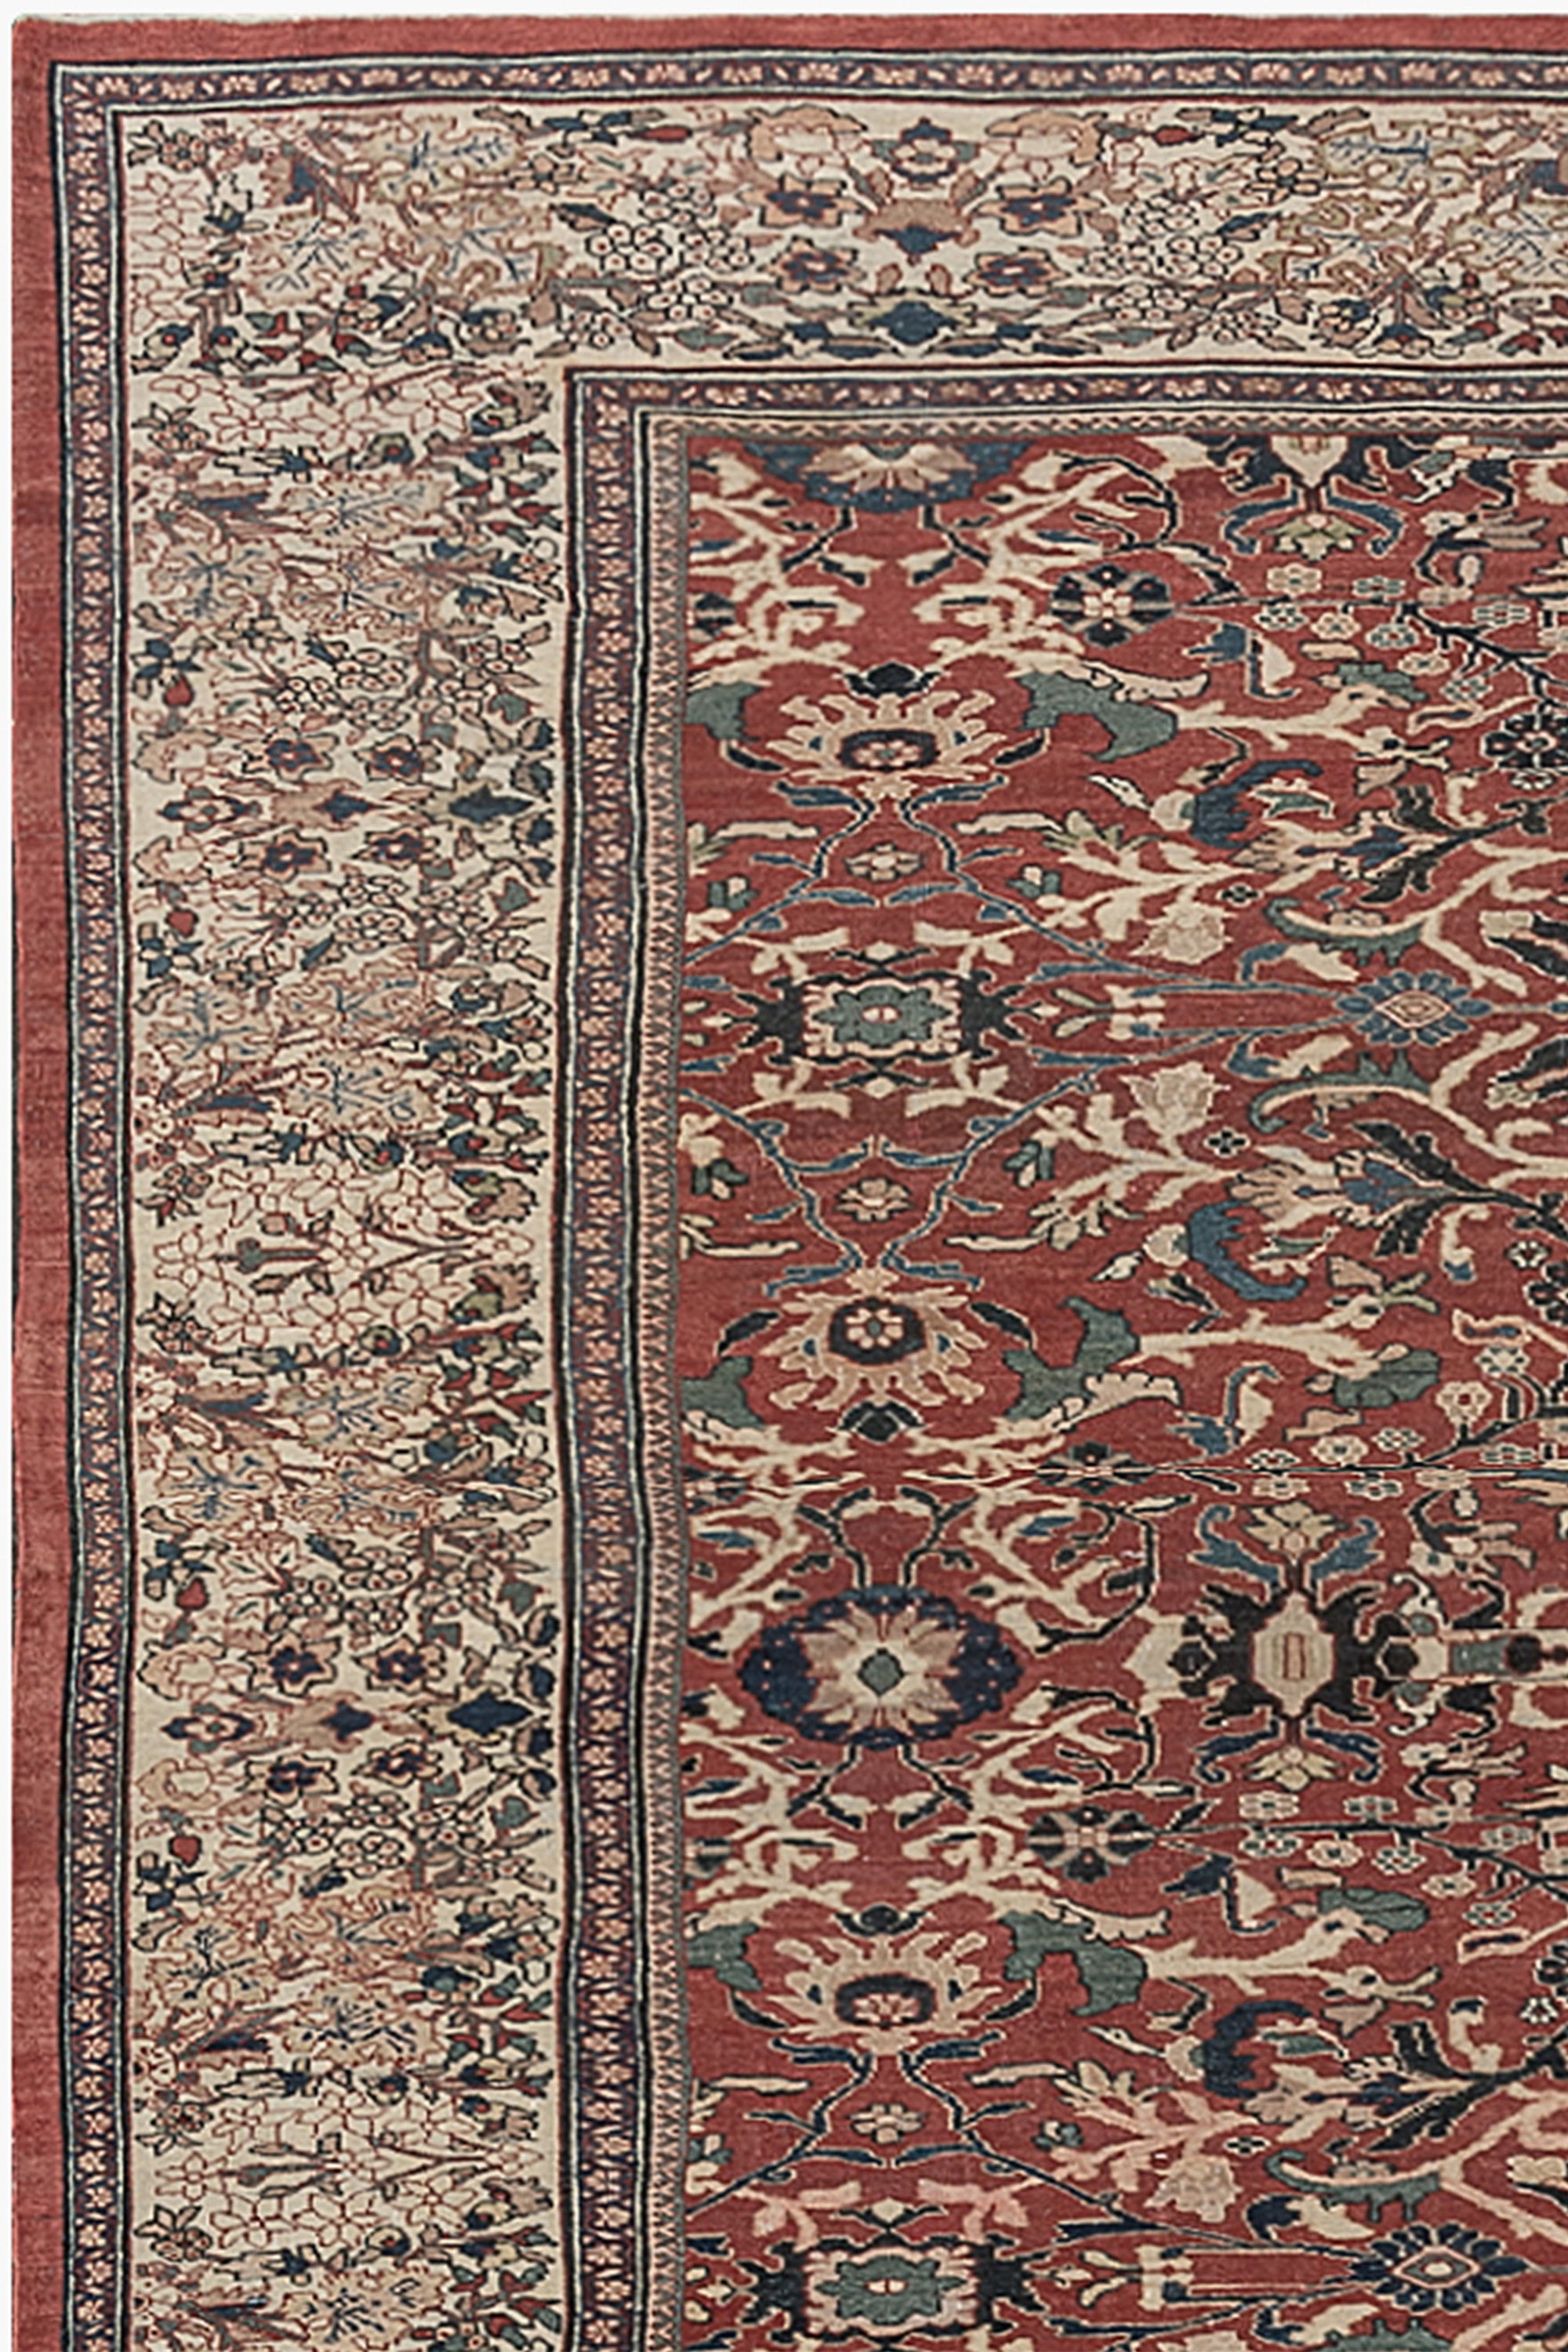 SULTANABAD RUG, WEST PERSIA, 13'6" X 24'6" - thumbnail 2